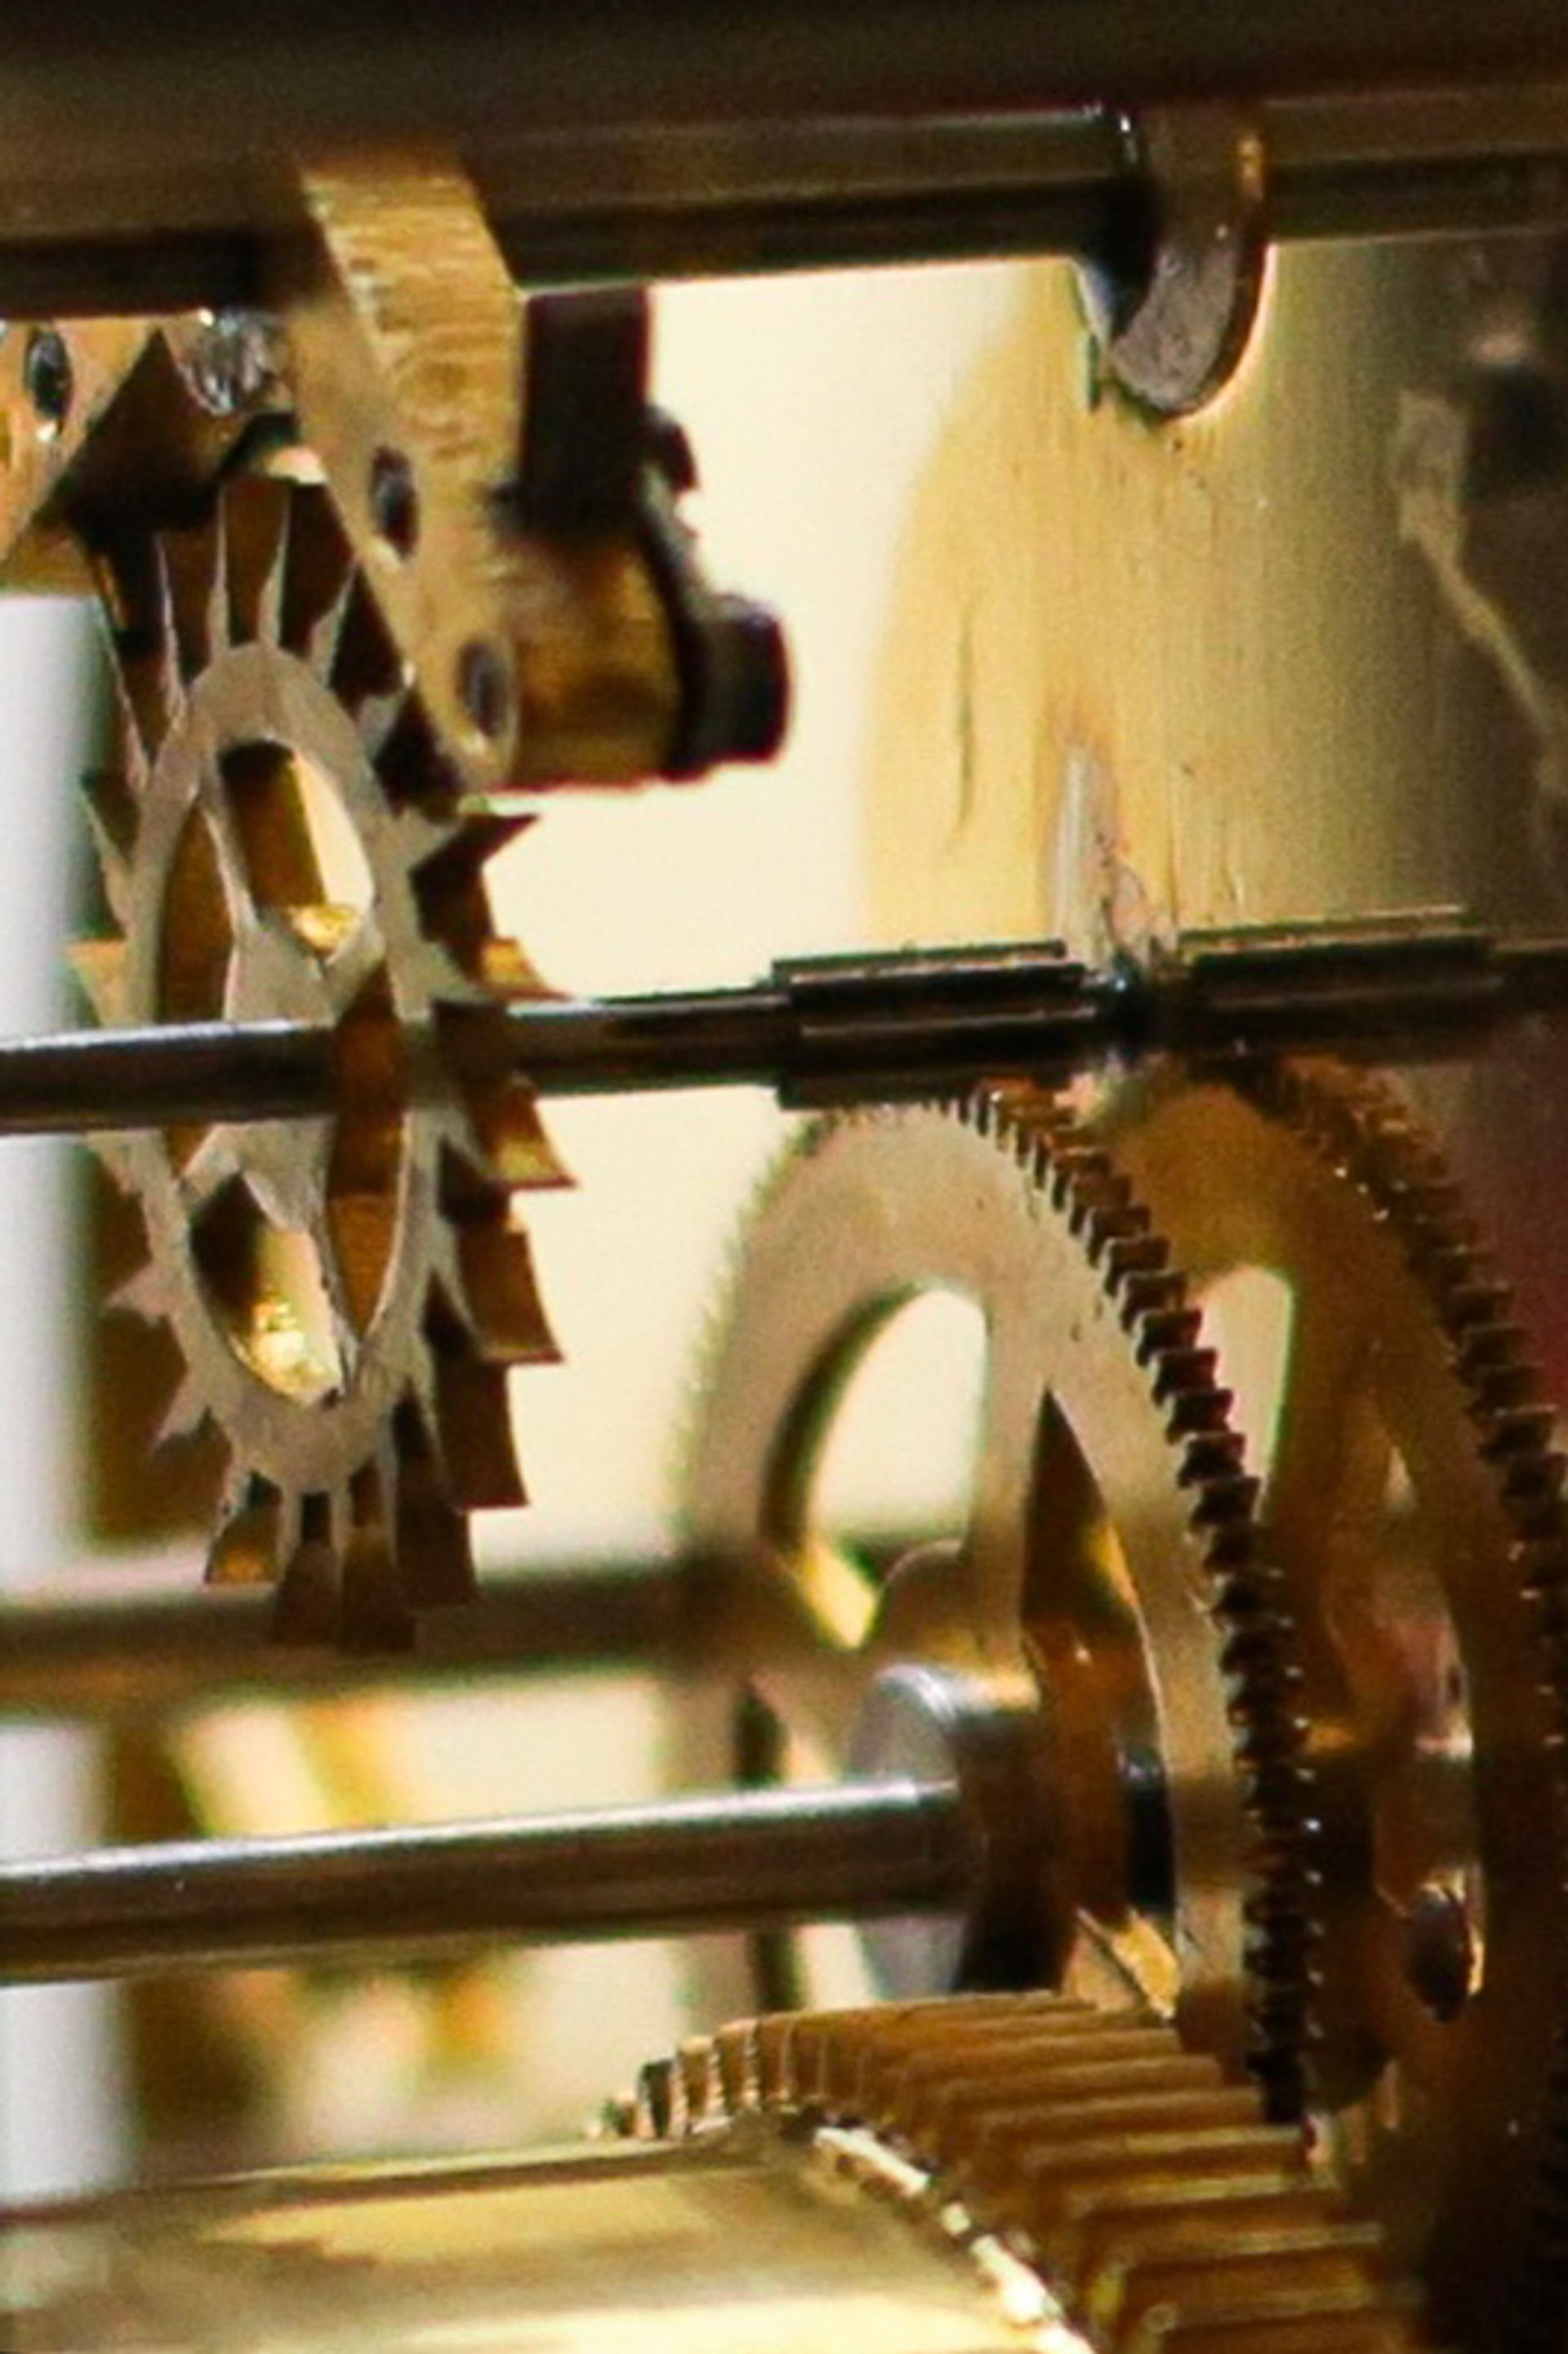 A close up of the anchor escapement of the Koma clock. The wheel with sharp pointed gears is the escape wheel, and the structure over the escape wheel is the anchor.